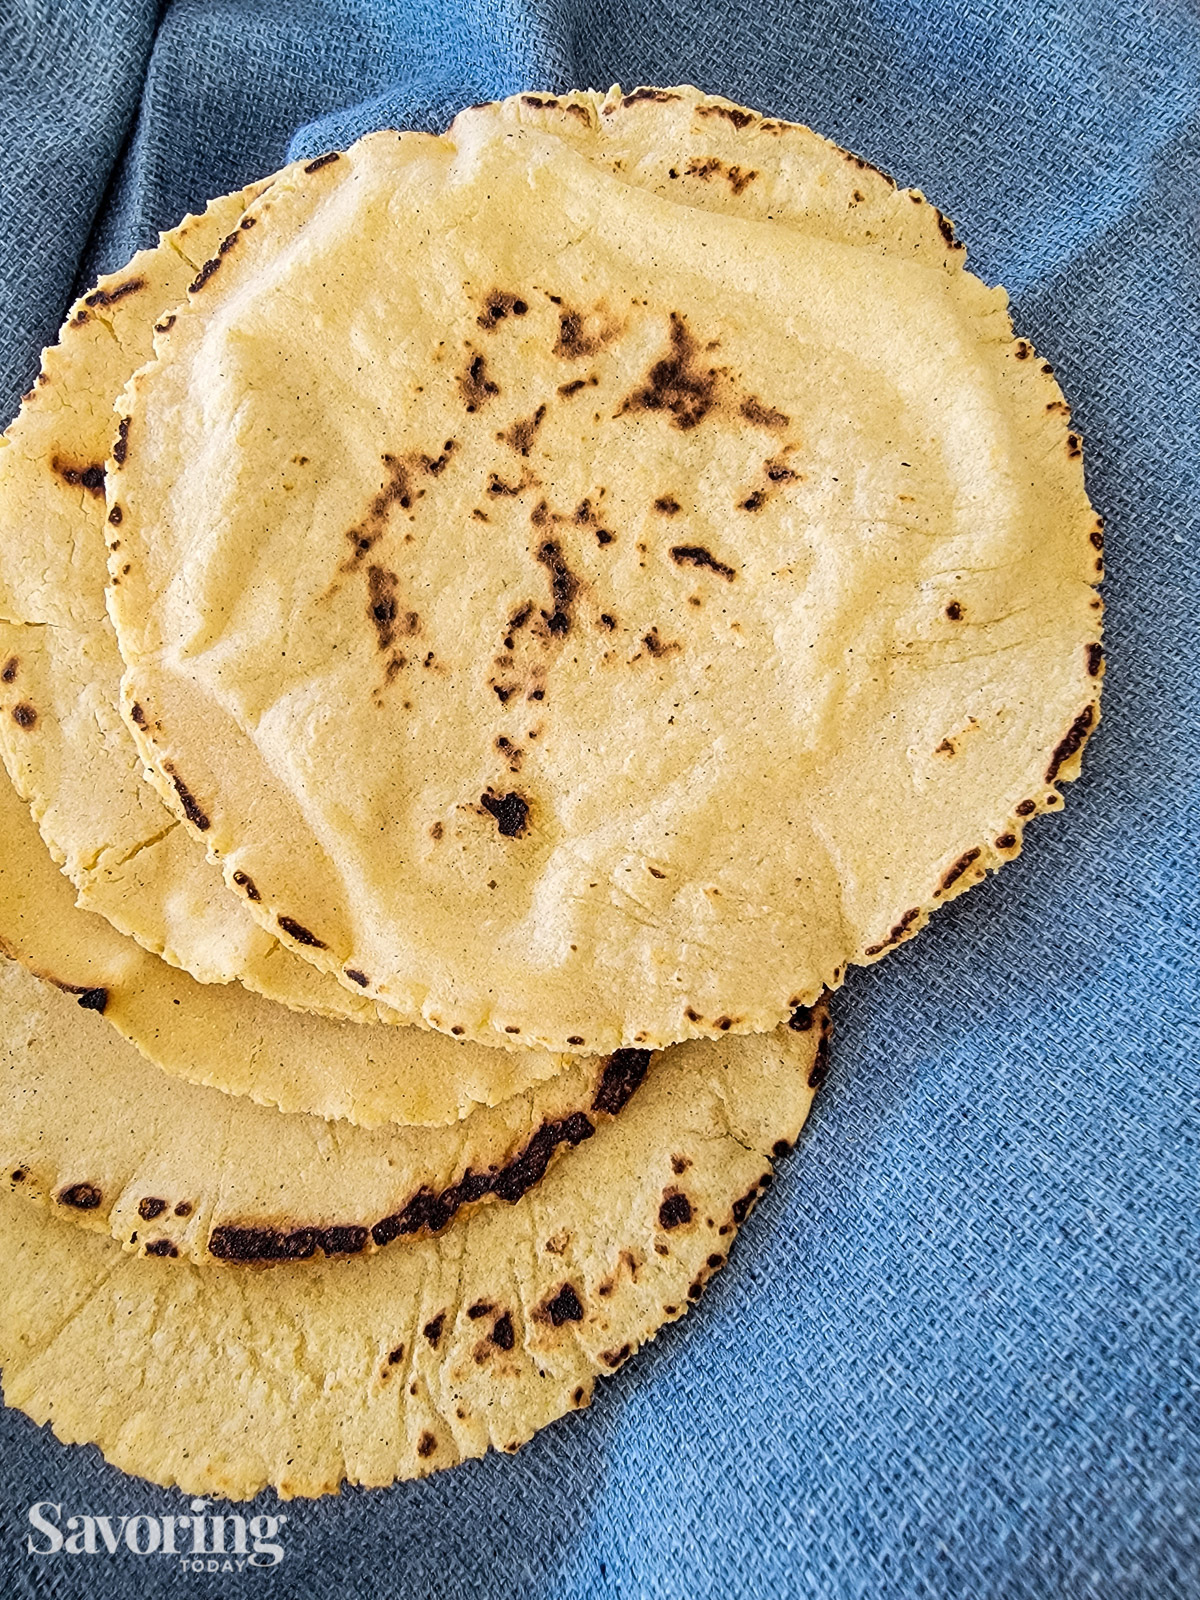 corn tortillas stacked and spread on a blue towel